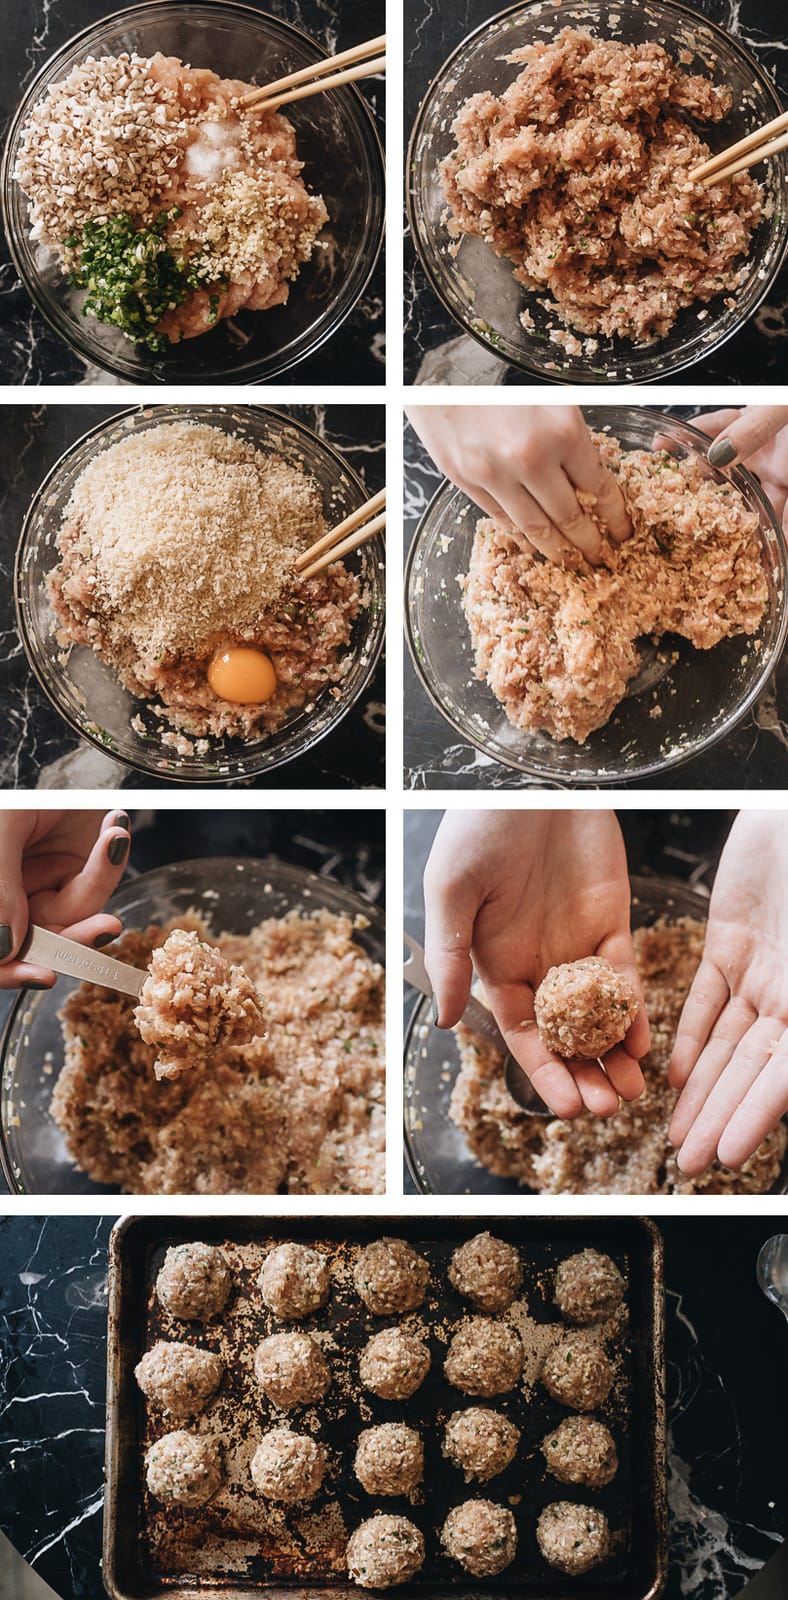 How to make meatballs step-by-step